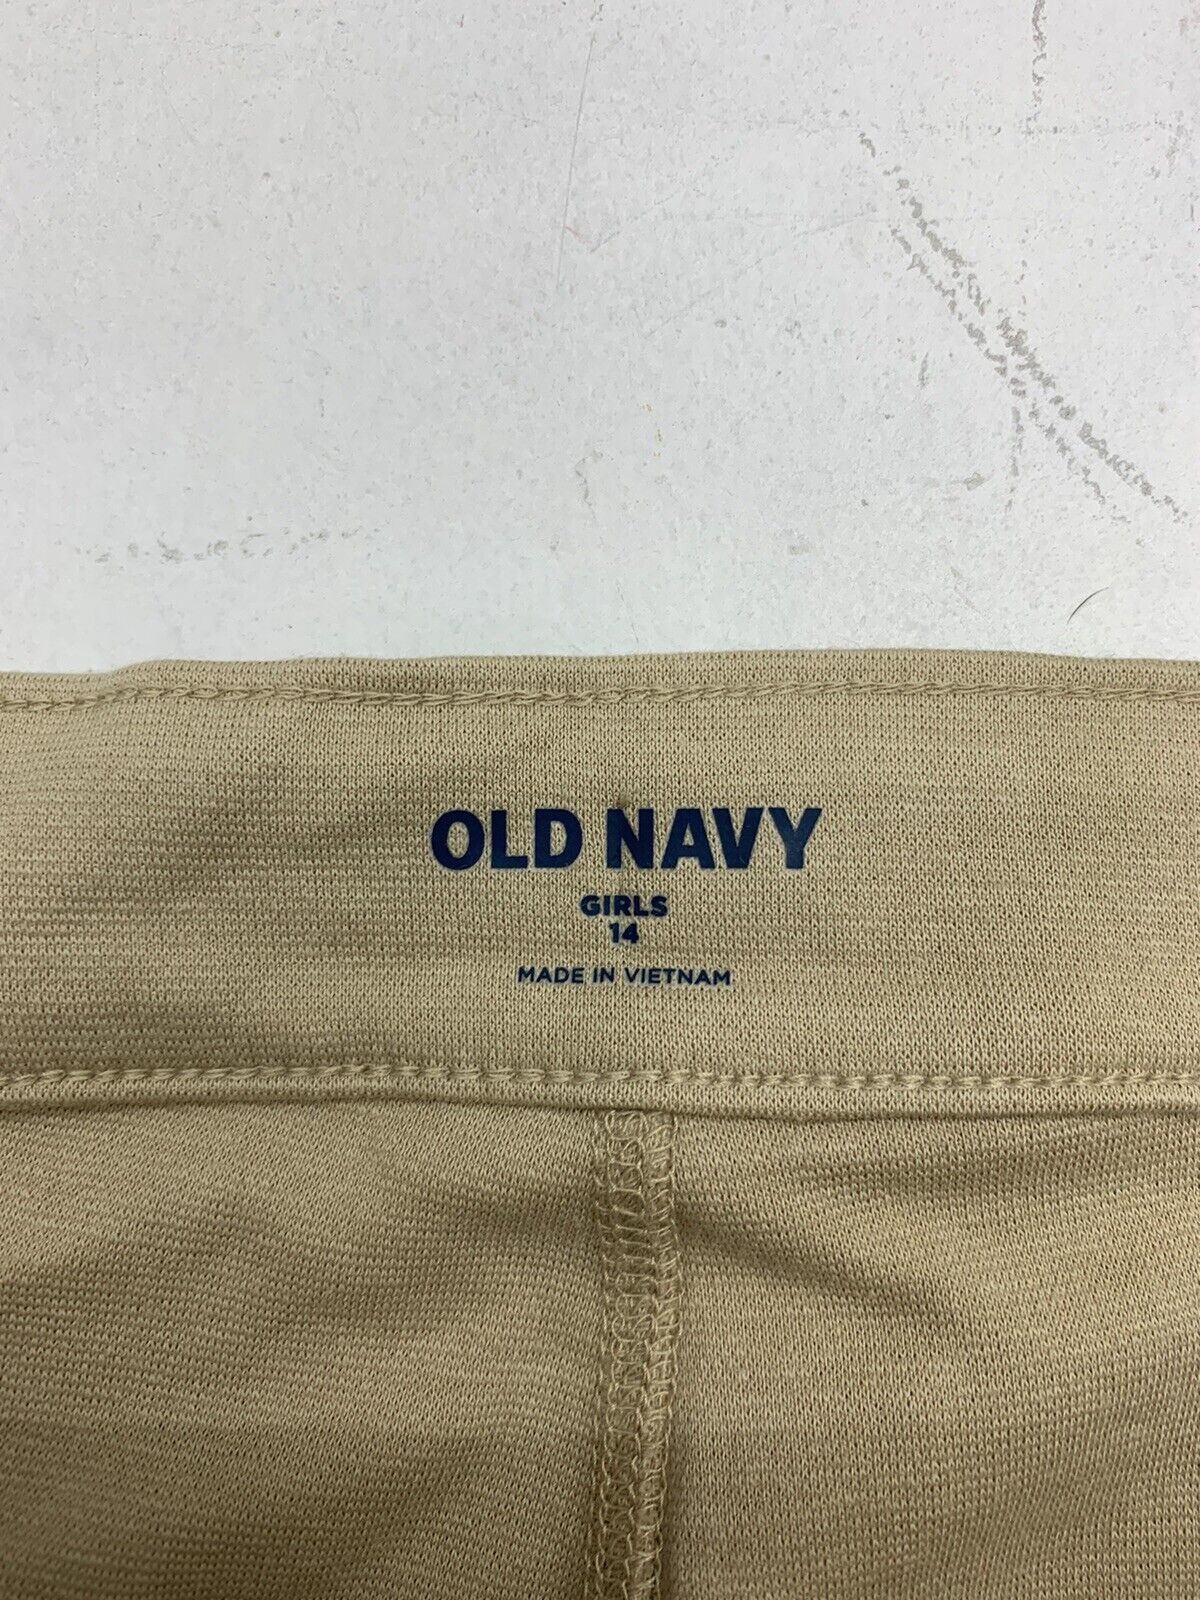 Old Navy Girls Size 14 Pants